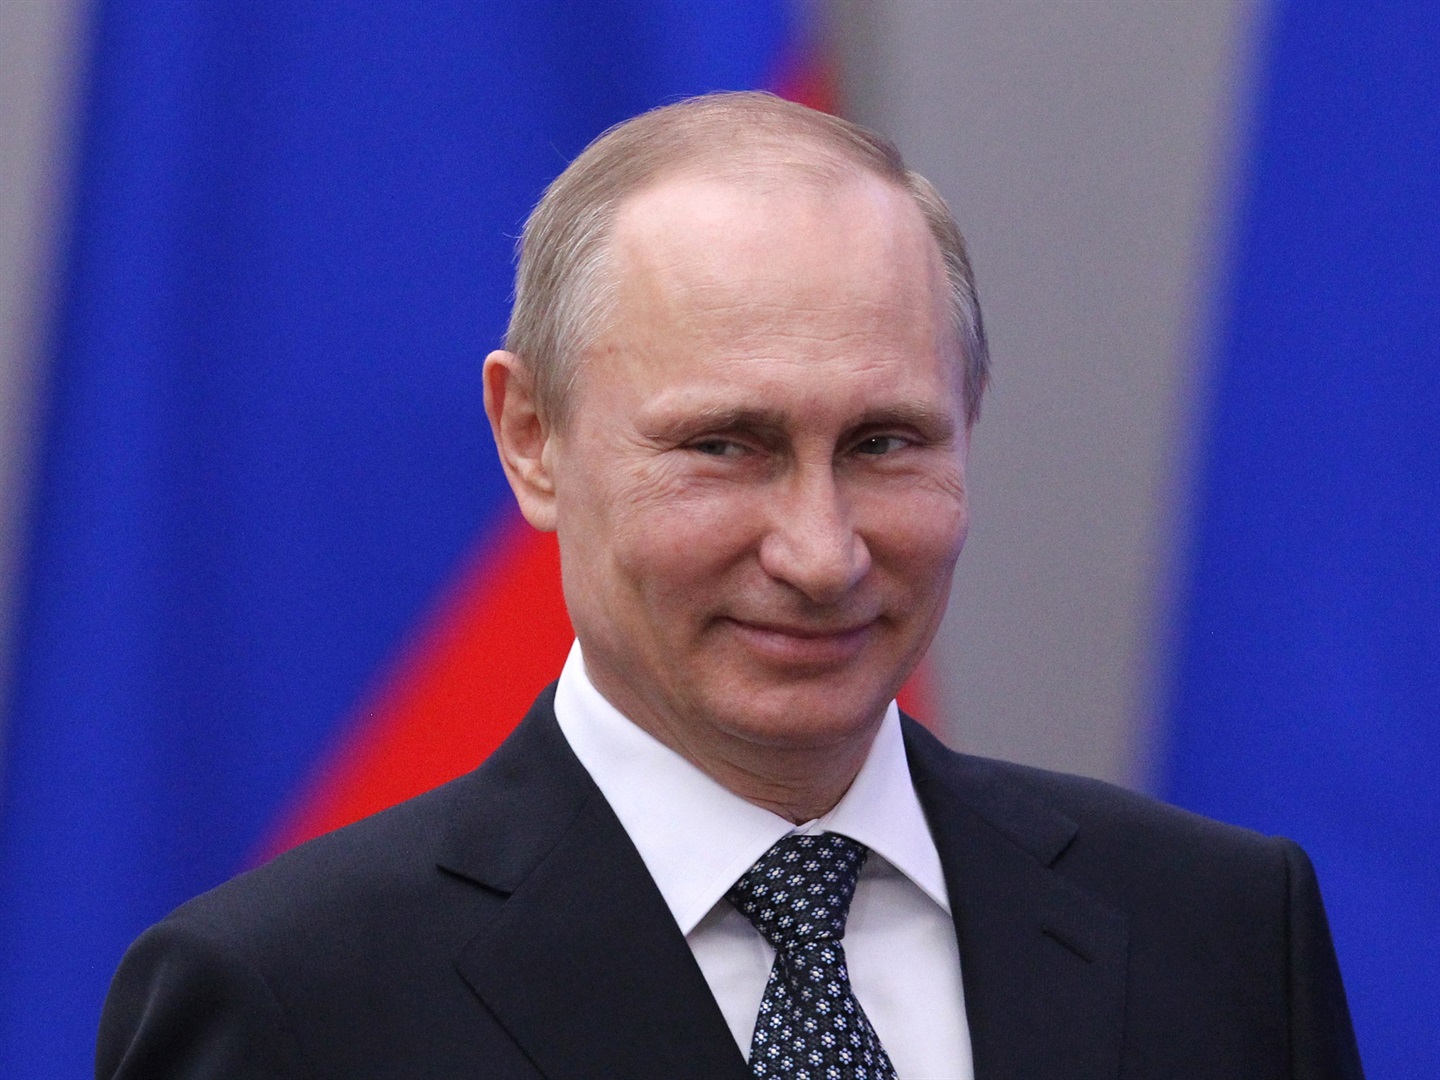 Arrest warrant for Putin: Presidency won't 'speculate' on scenario if Russian president arrives in SA | News24